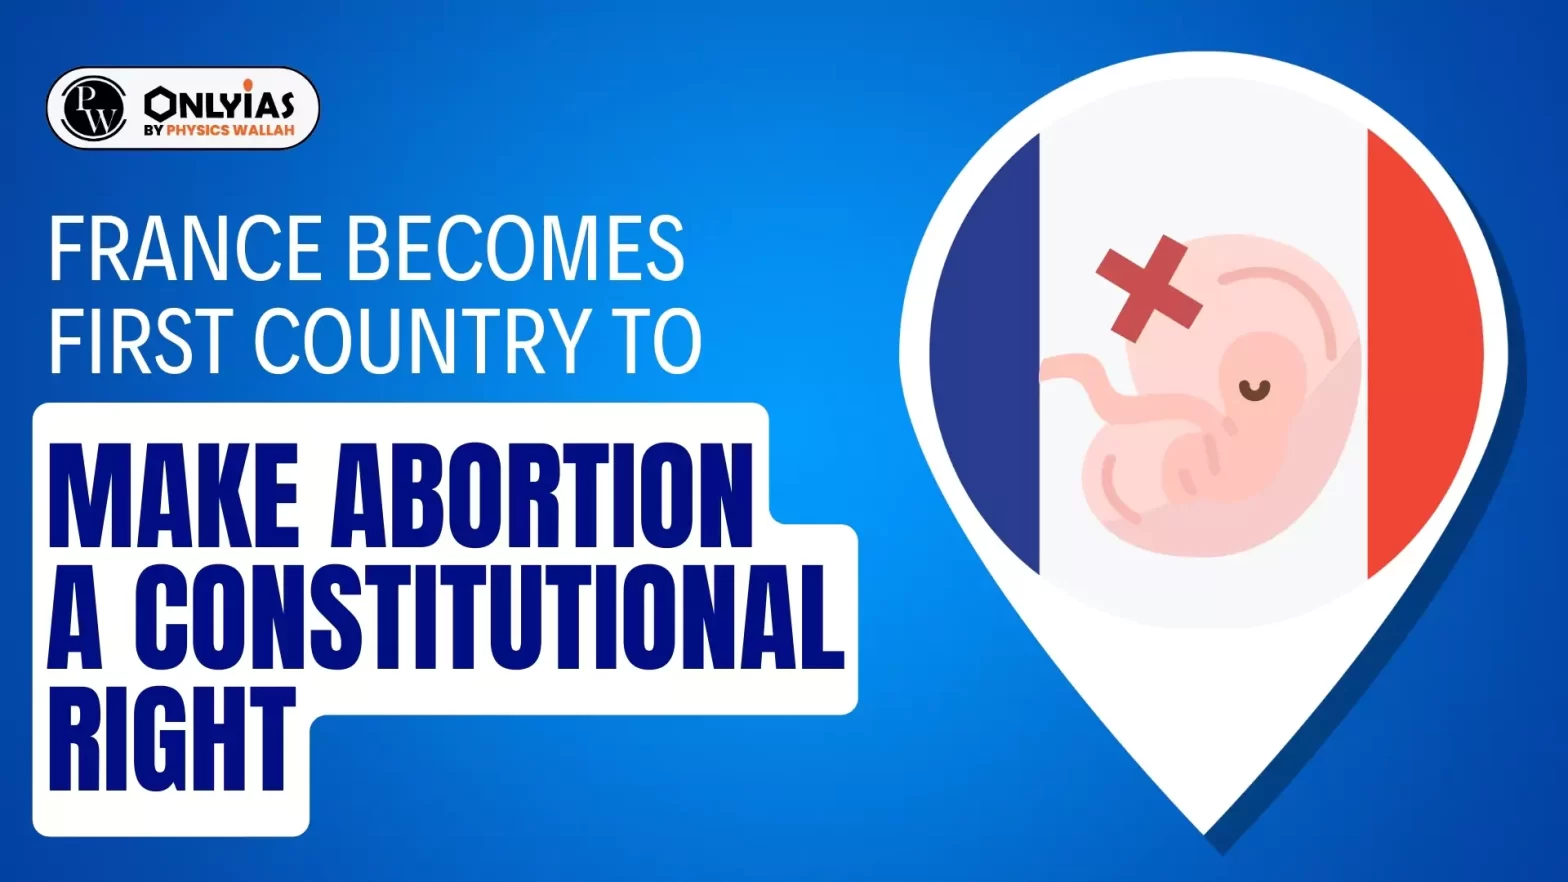 France Becomes First Country to Make Abortion a Constitutional Right